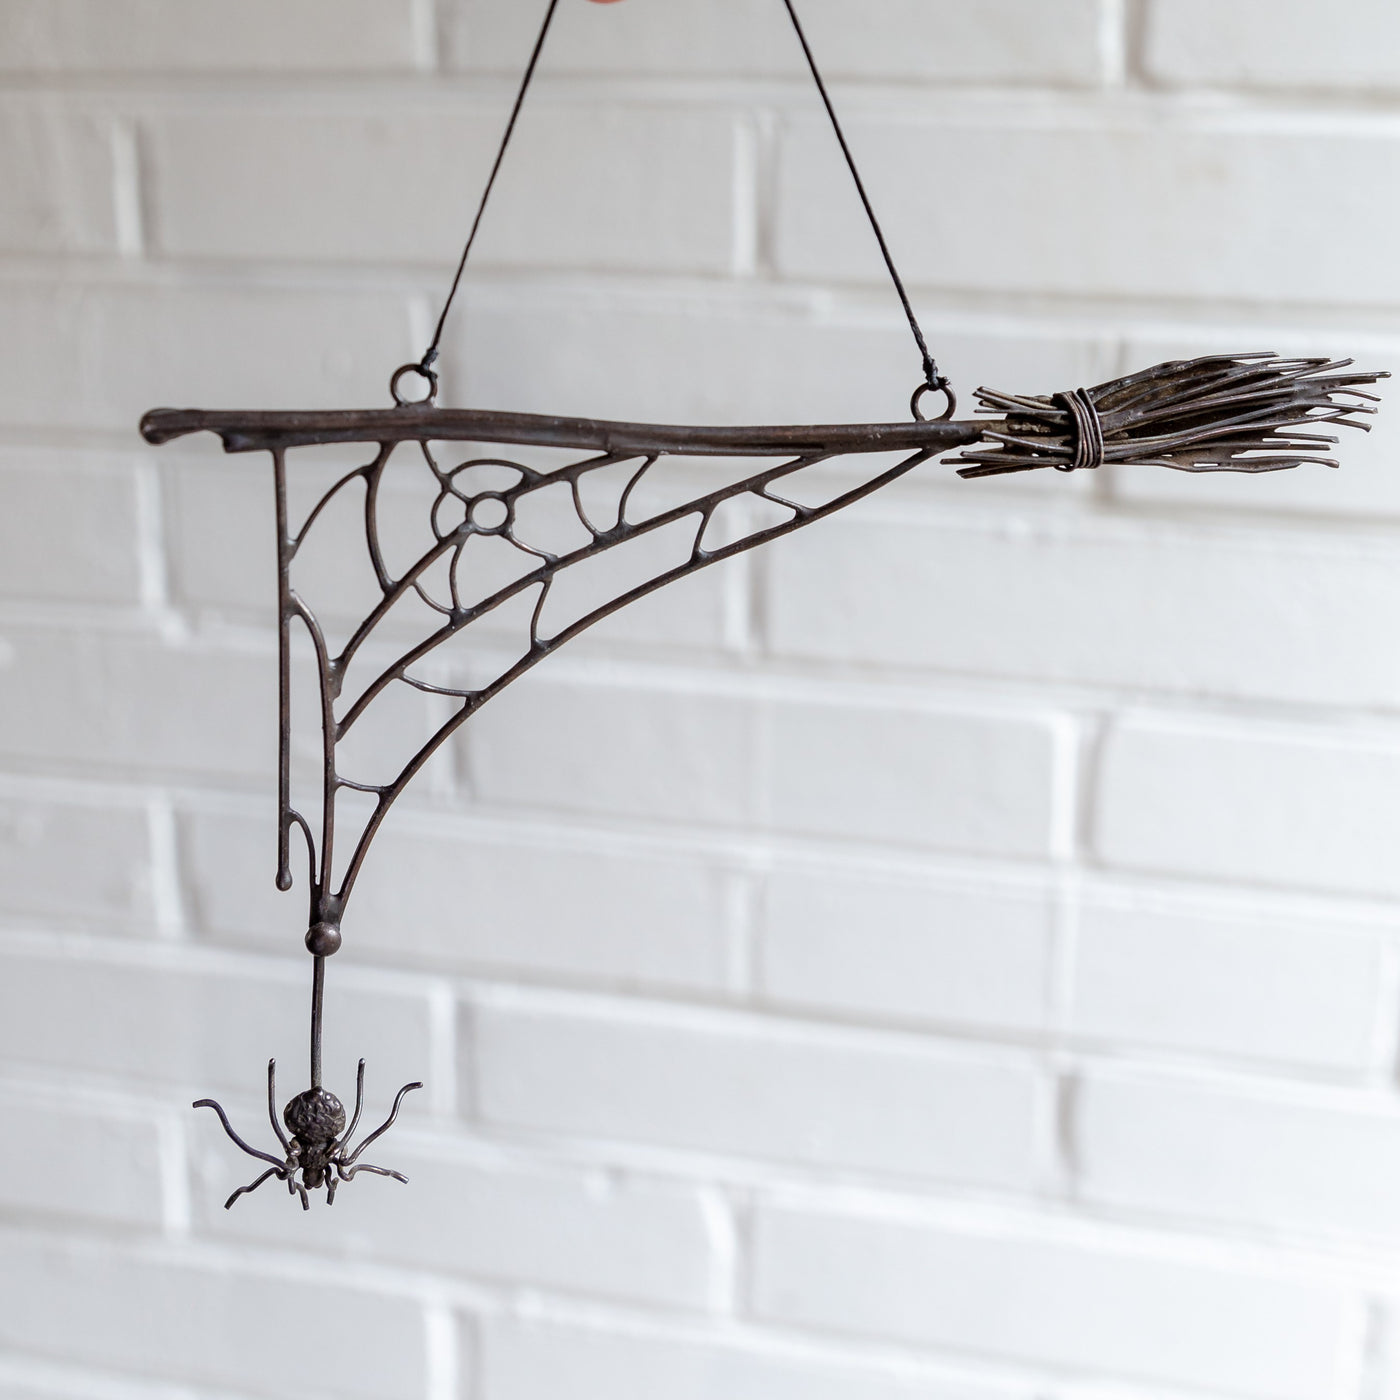 Copper wire Halloween broom with a web spider ghastly decoration